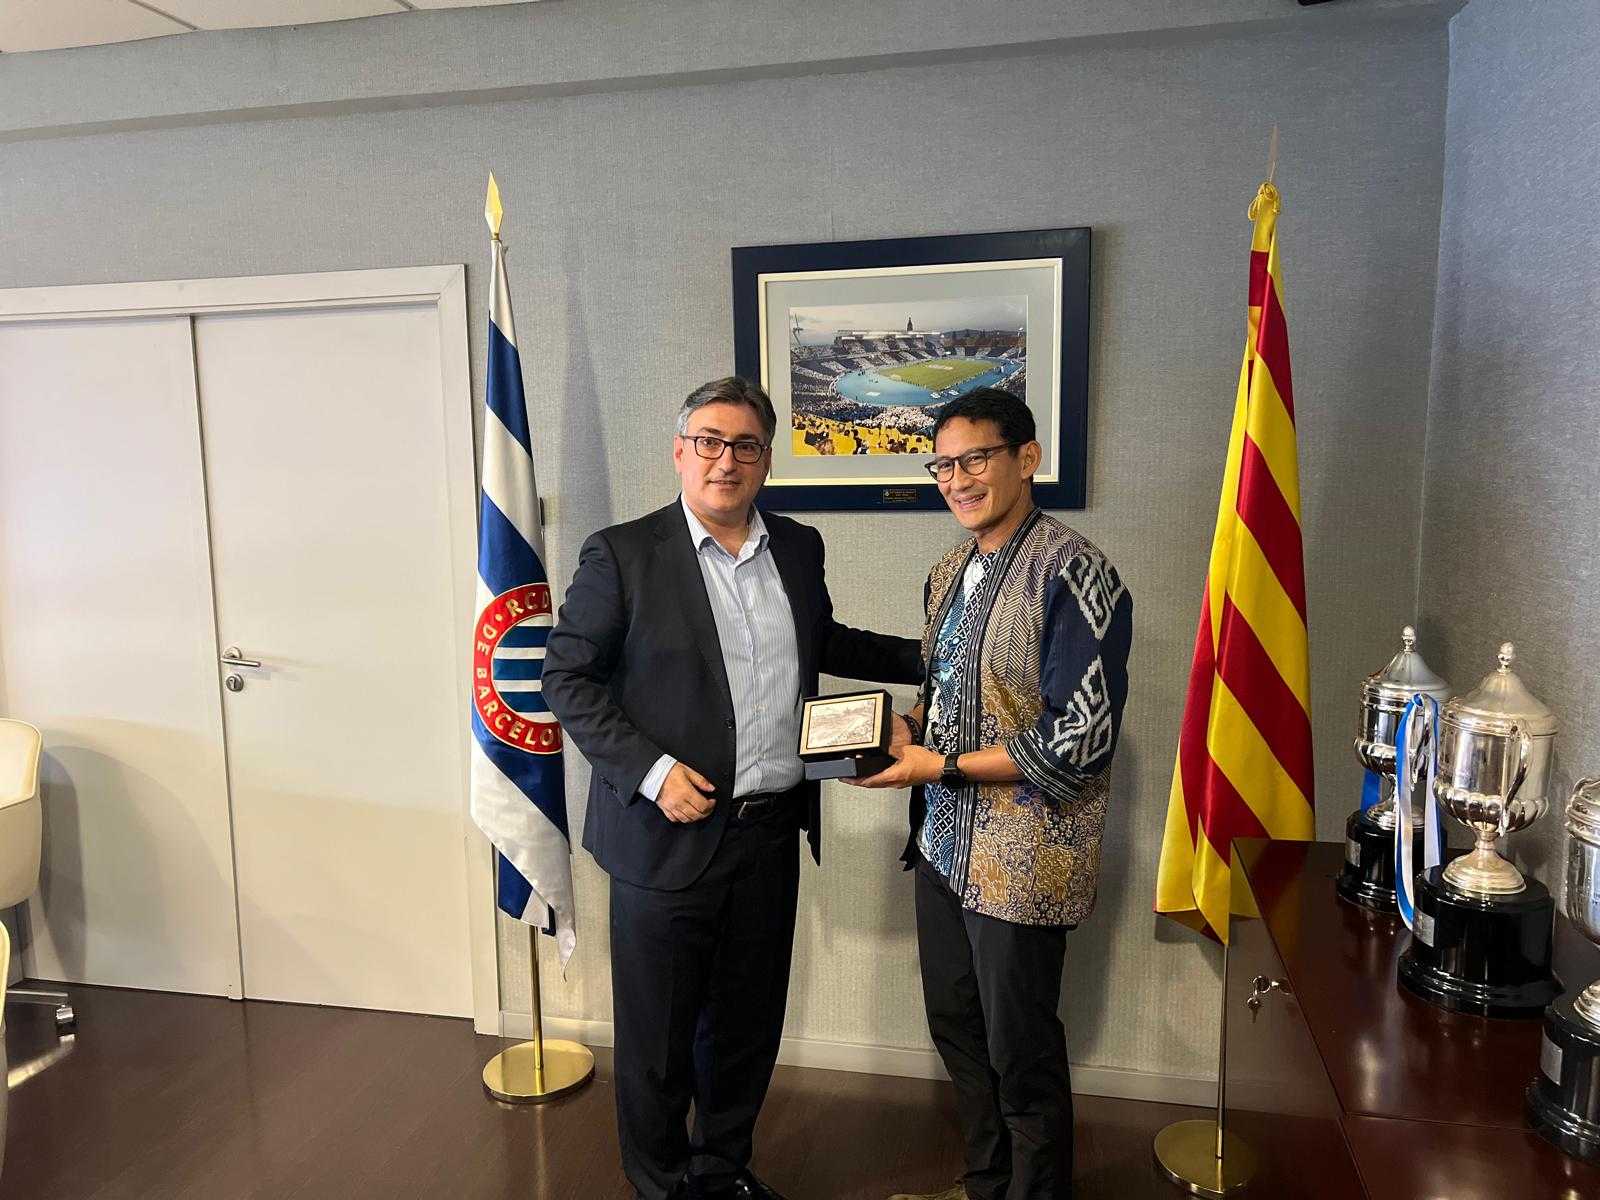 RCD Espanyol strengthen ties with Indonesia